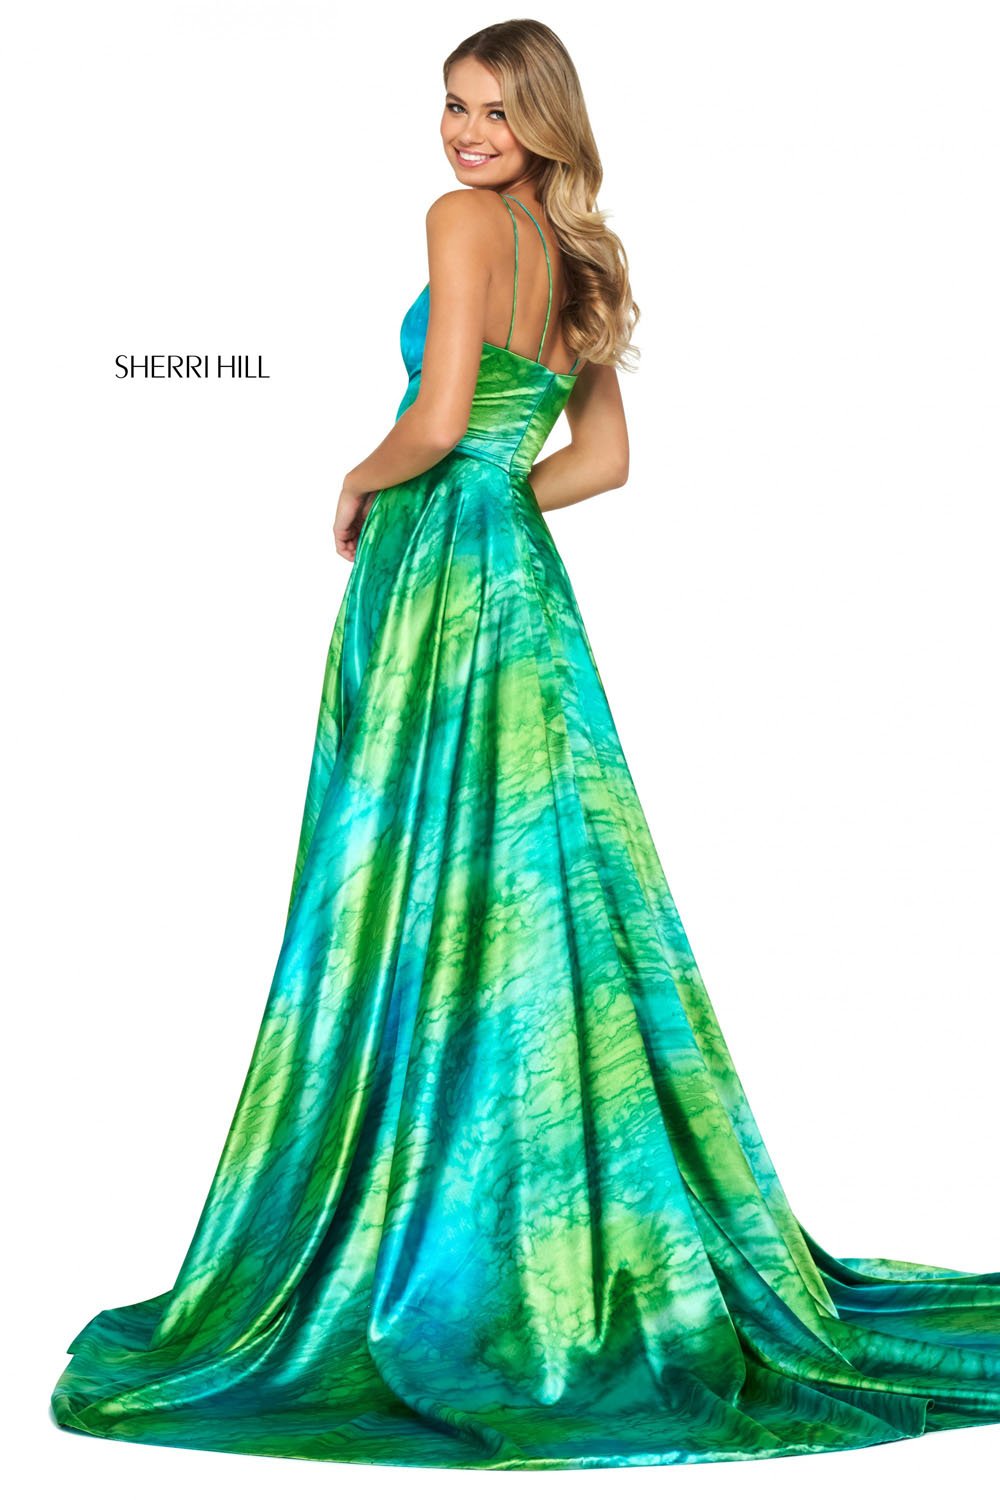 Sherri Hill 53889 dress images in these colors: Green Print.